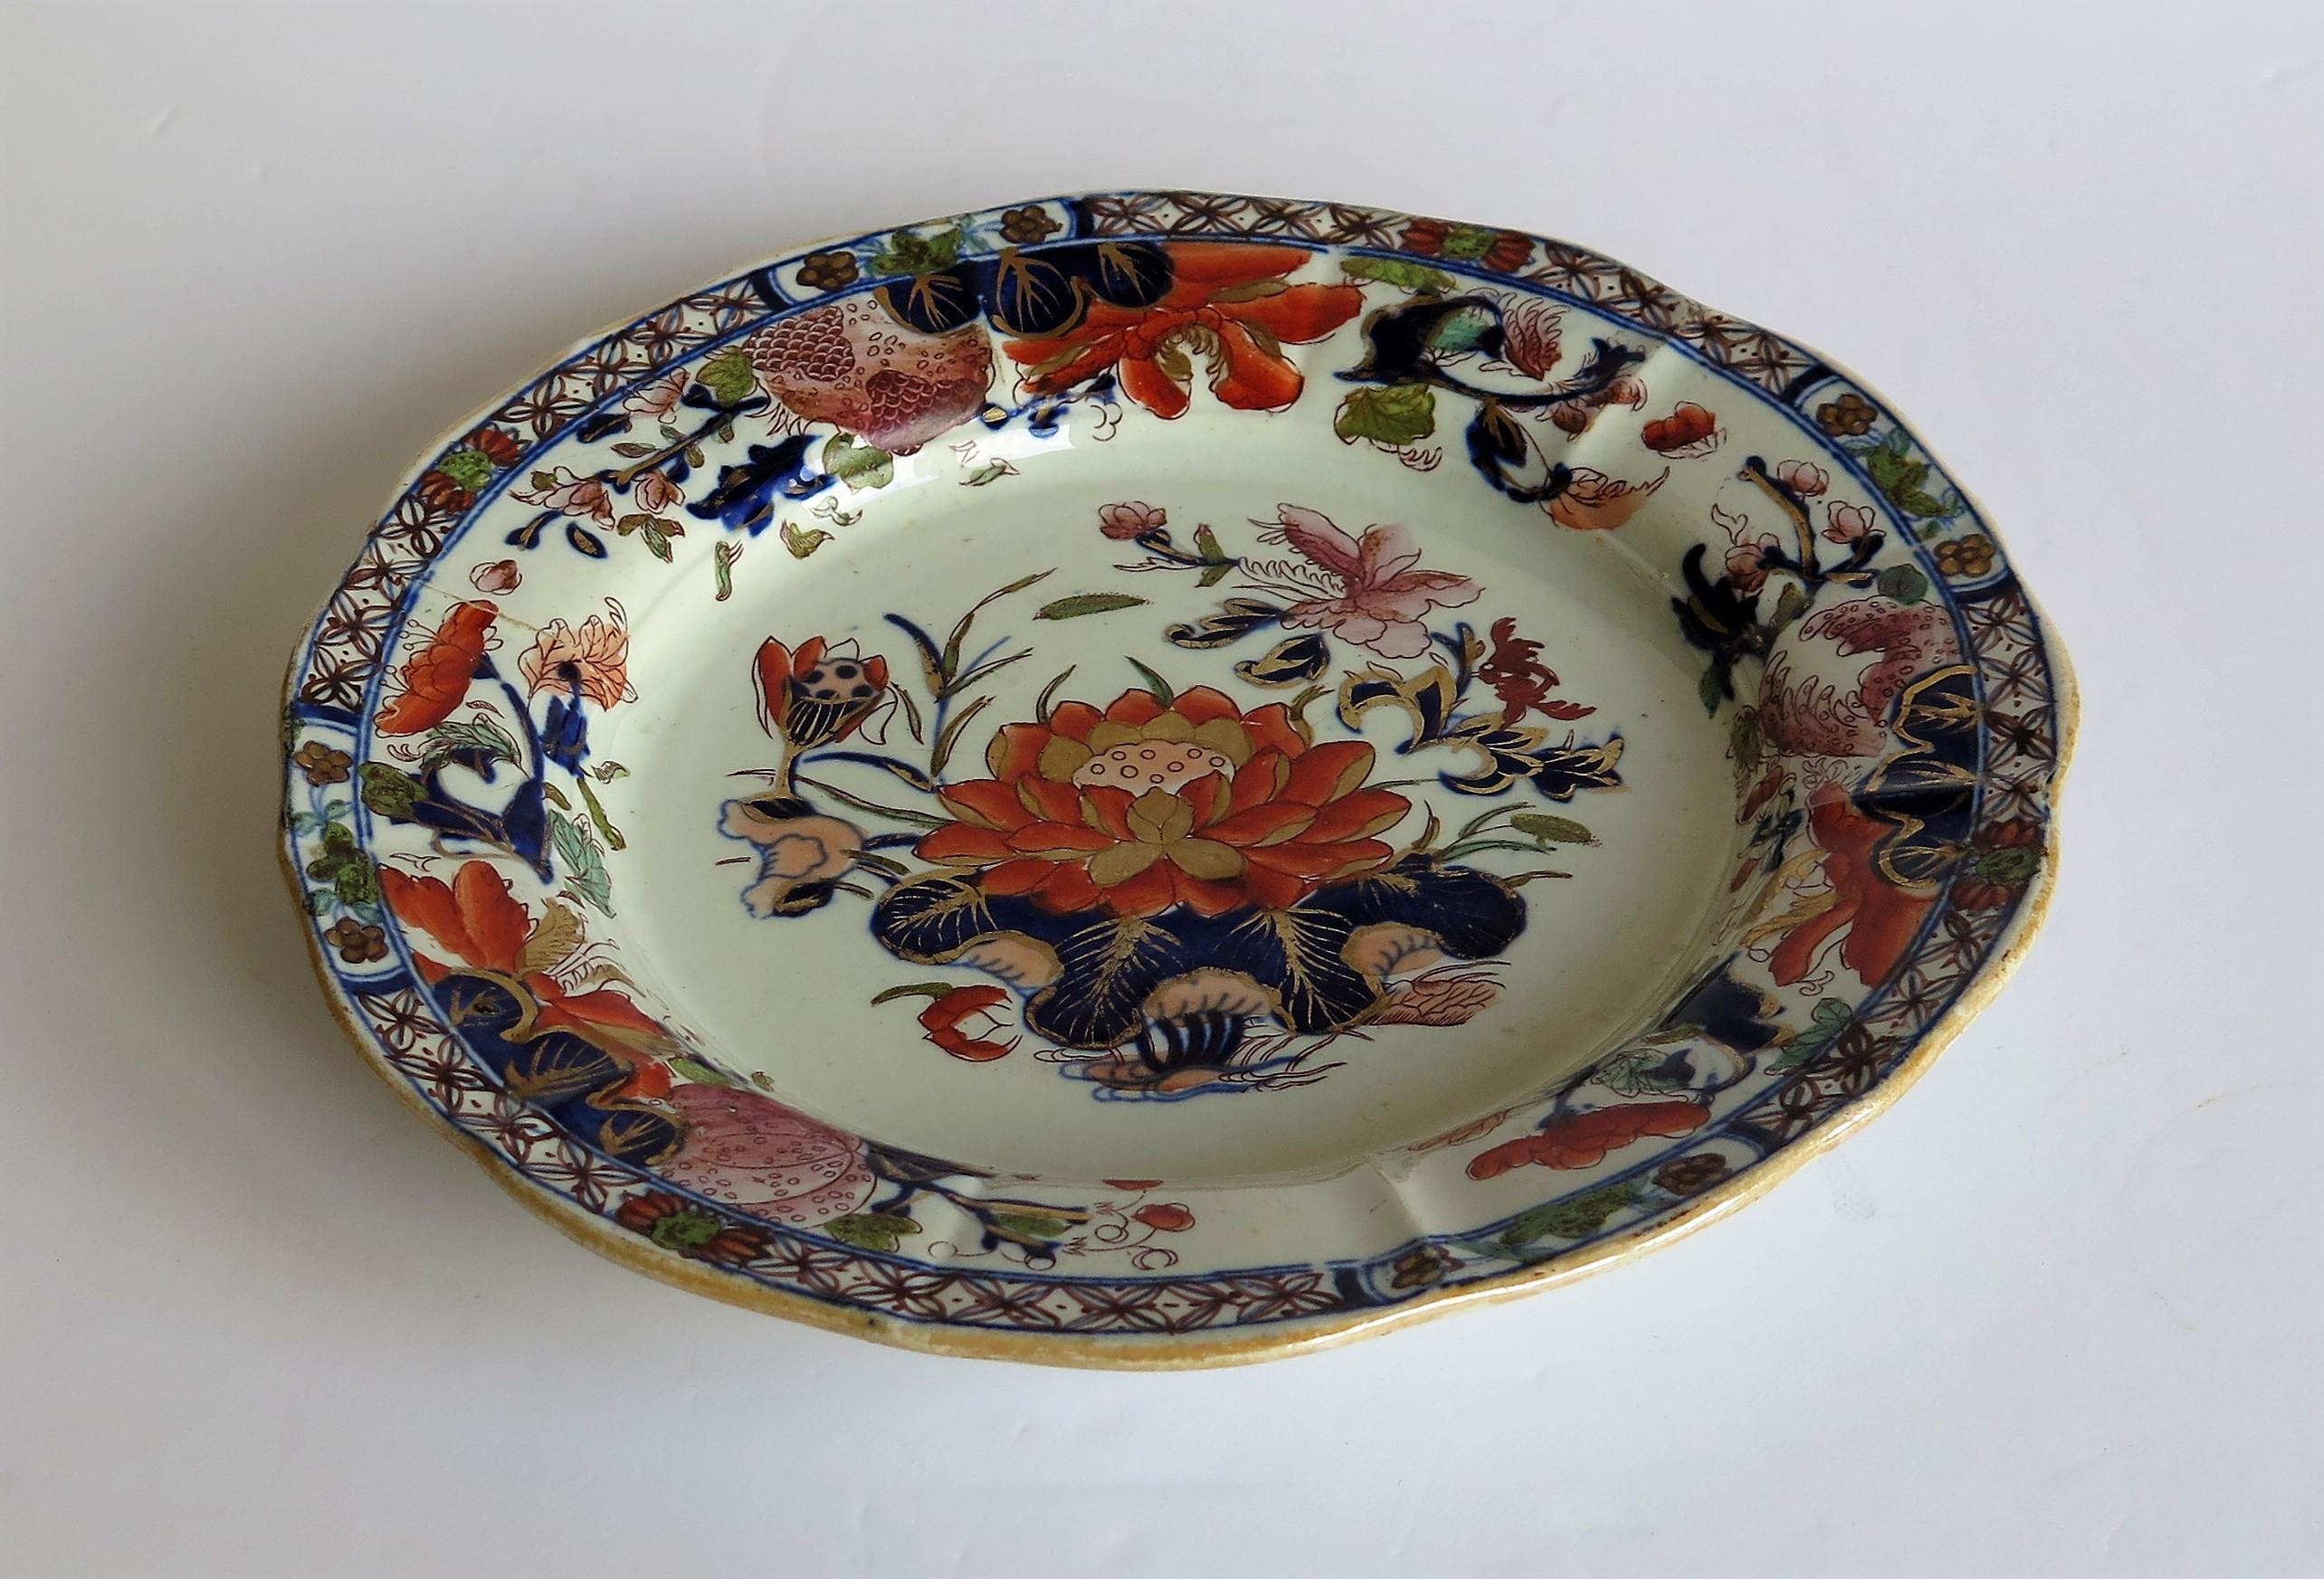 19th Century Mason's Ironstone Dish or Deep Plate Water Lily Pattern, Impressed Mark Ca. 1815